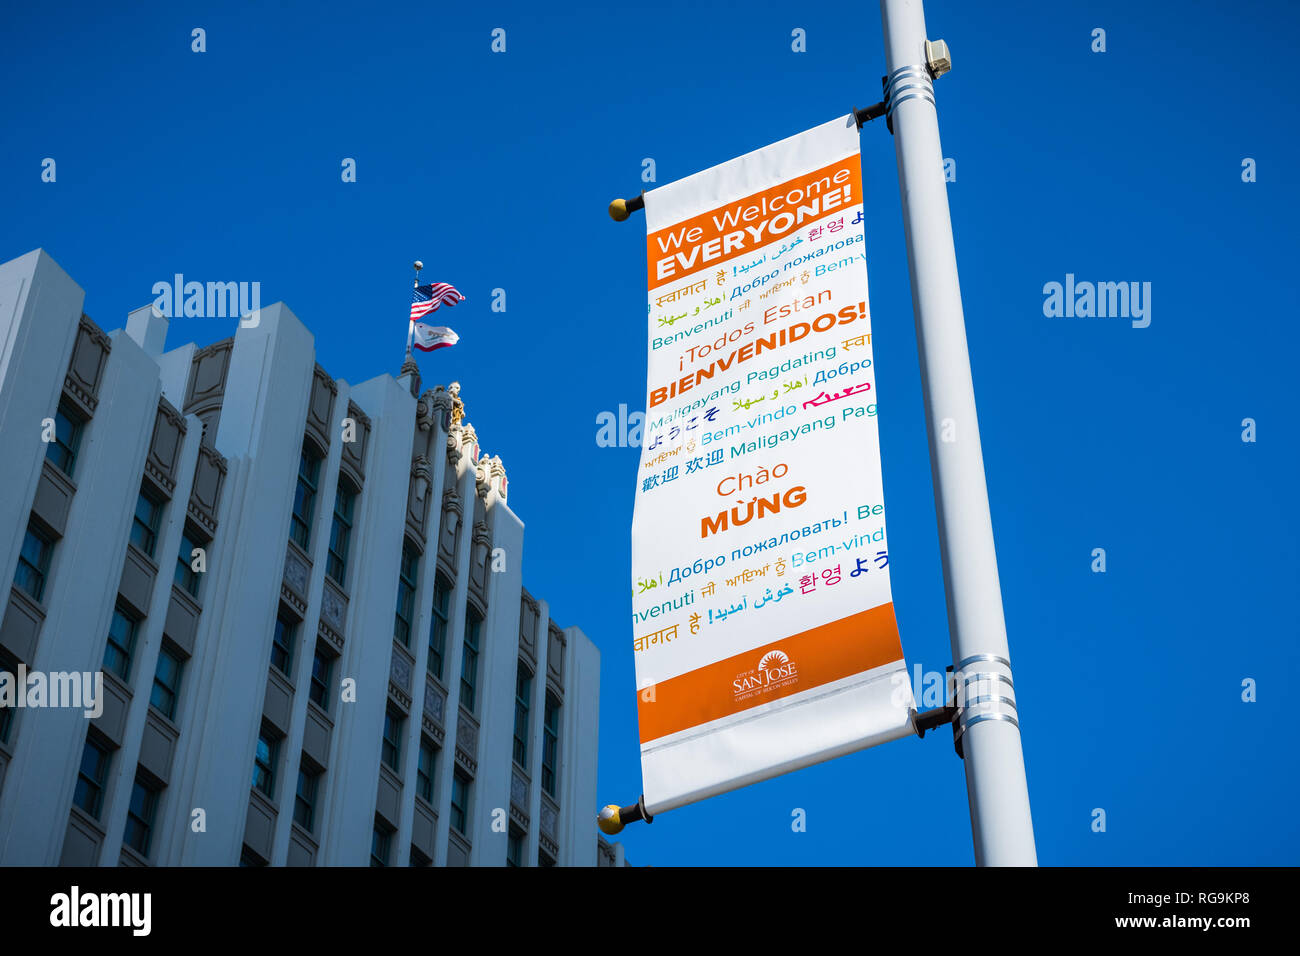 February 21, 2018 San Jose / CA / USA - Banners carrying the message 'We welcome everyone' in various languages posted on the side of the road; San Jo Stock Photo